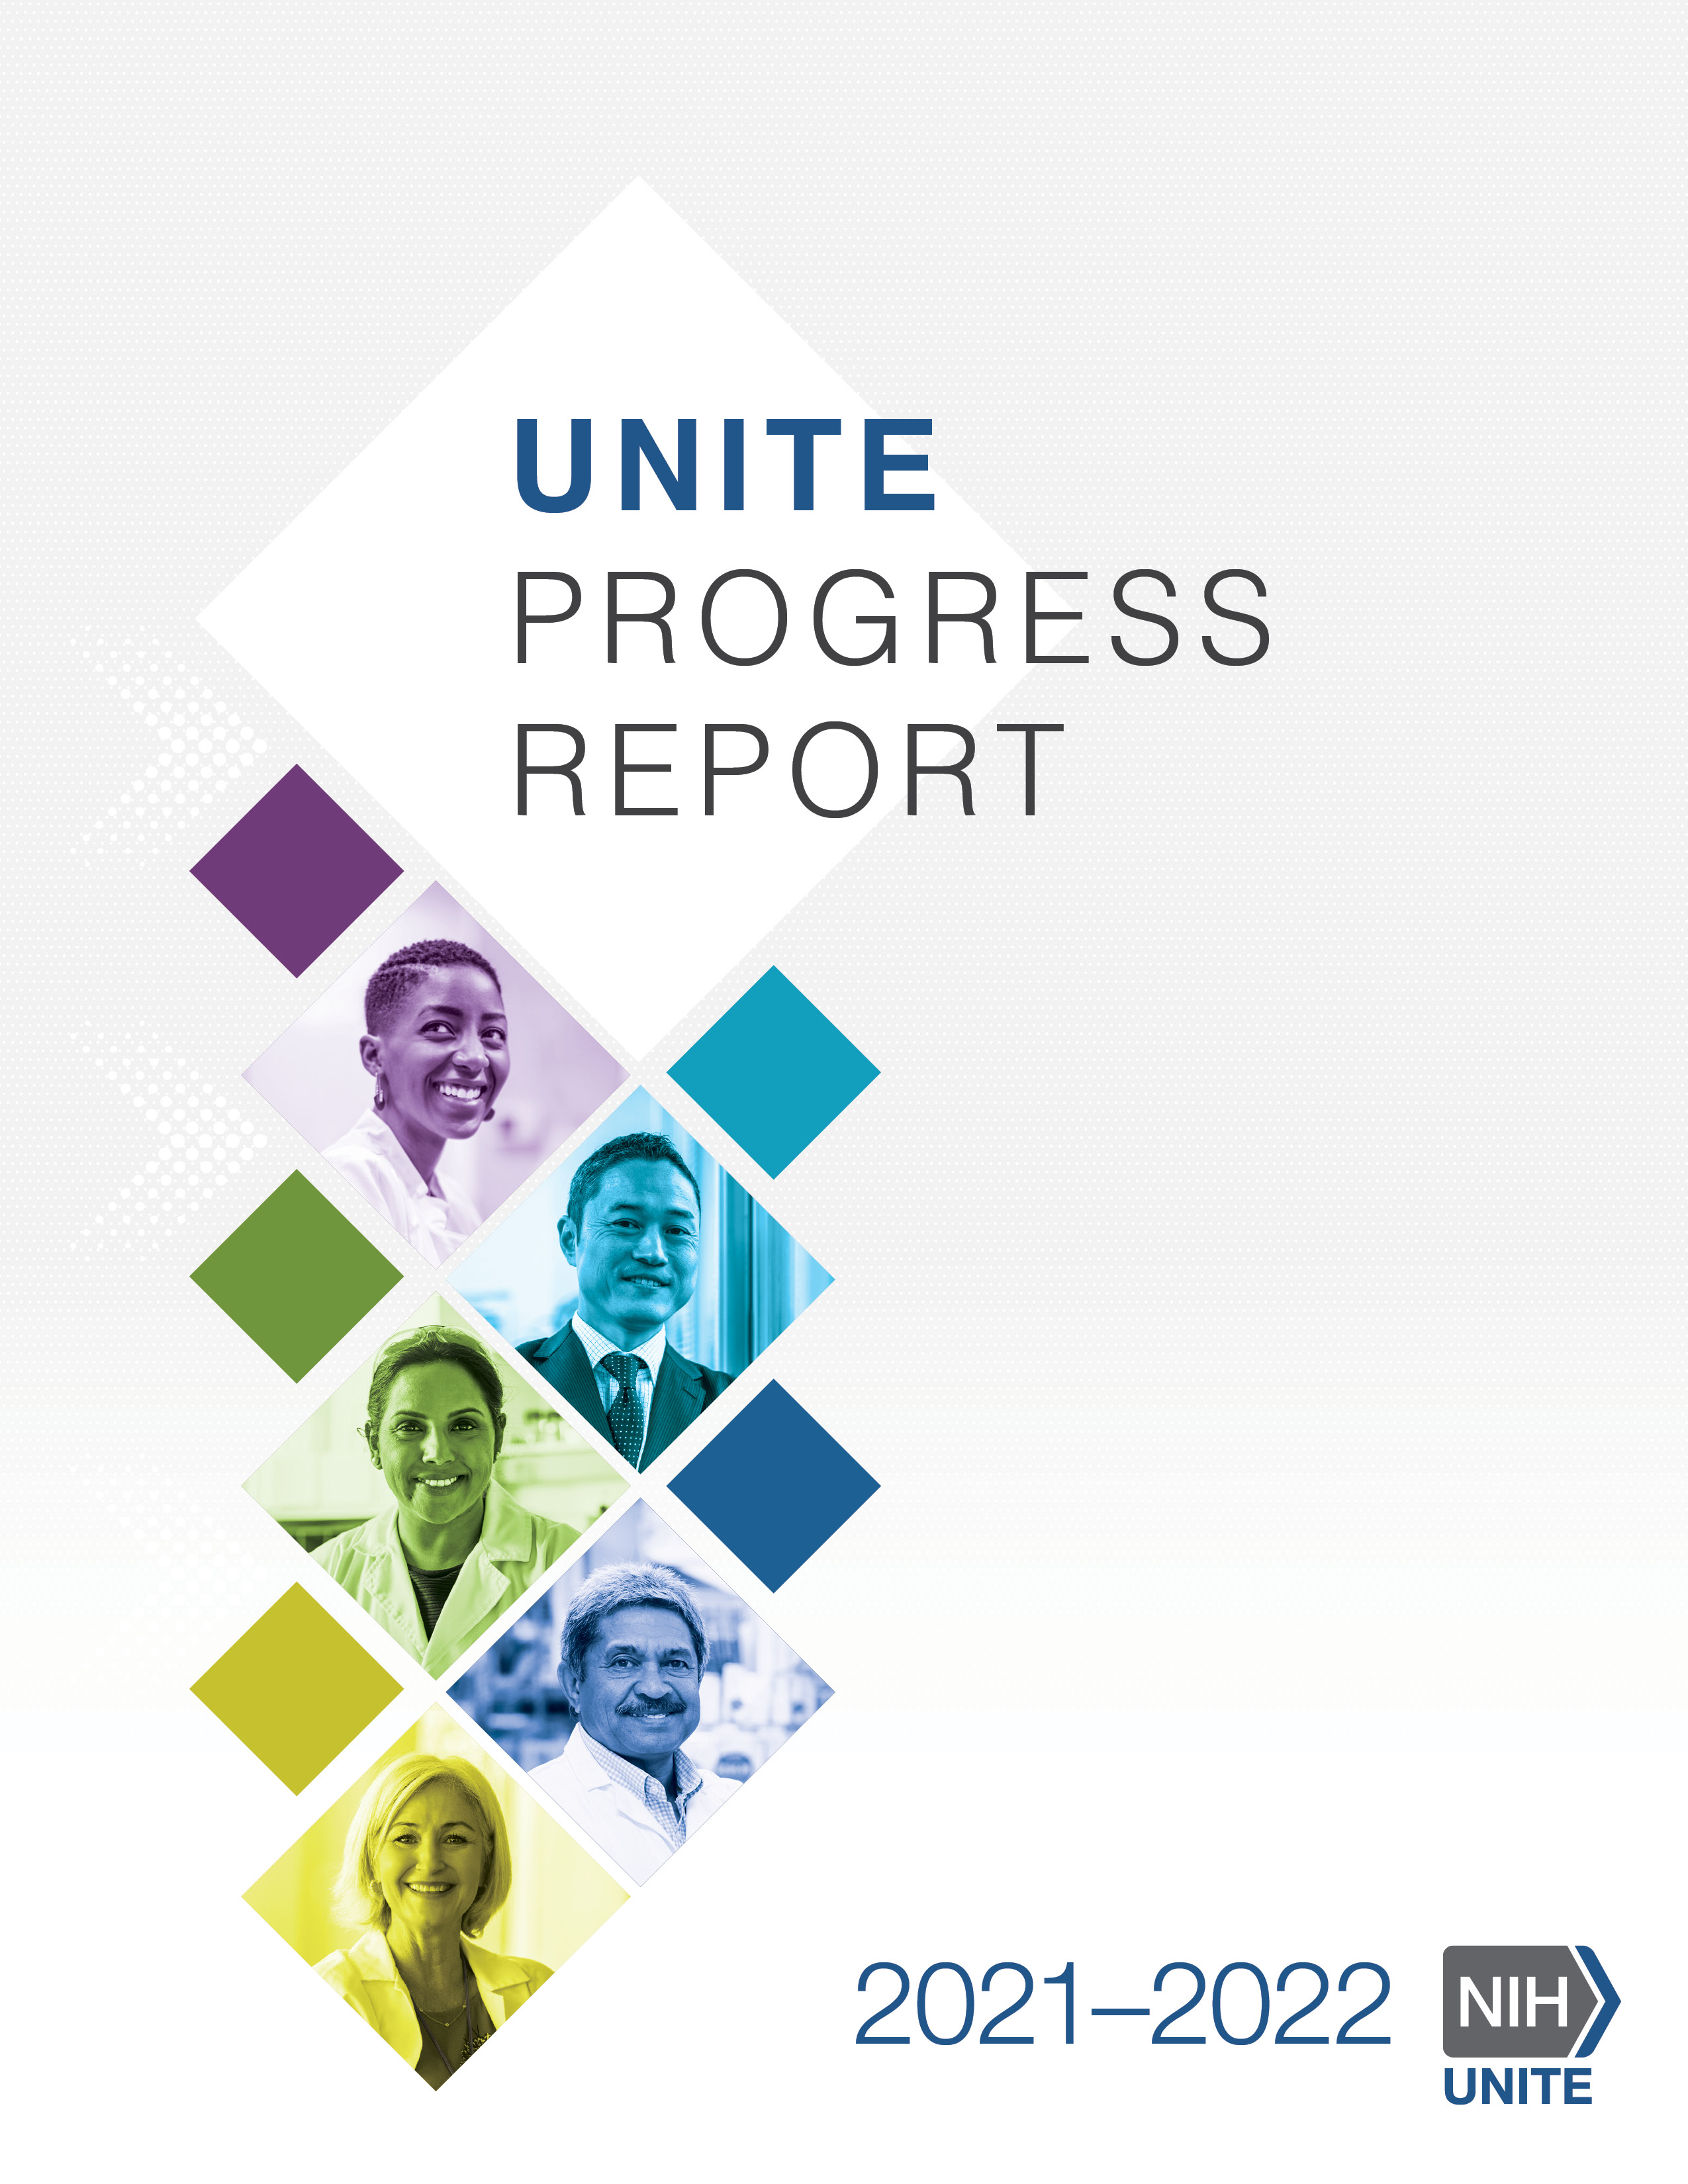 Progress Report - US Latinos and access to education